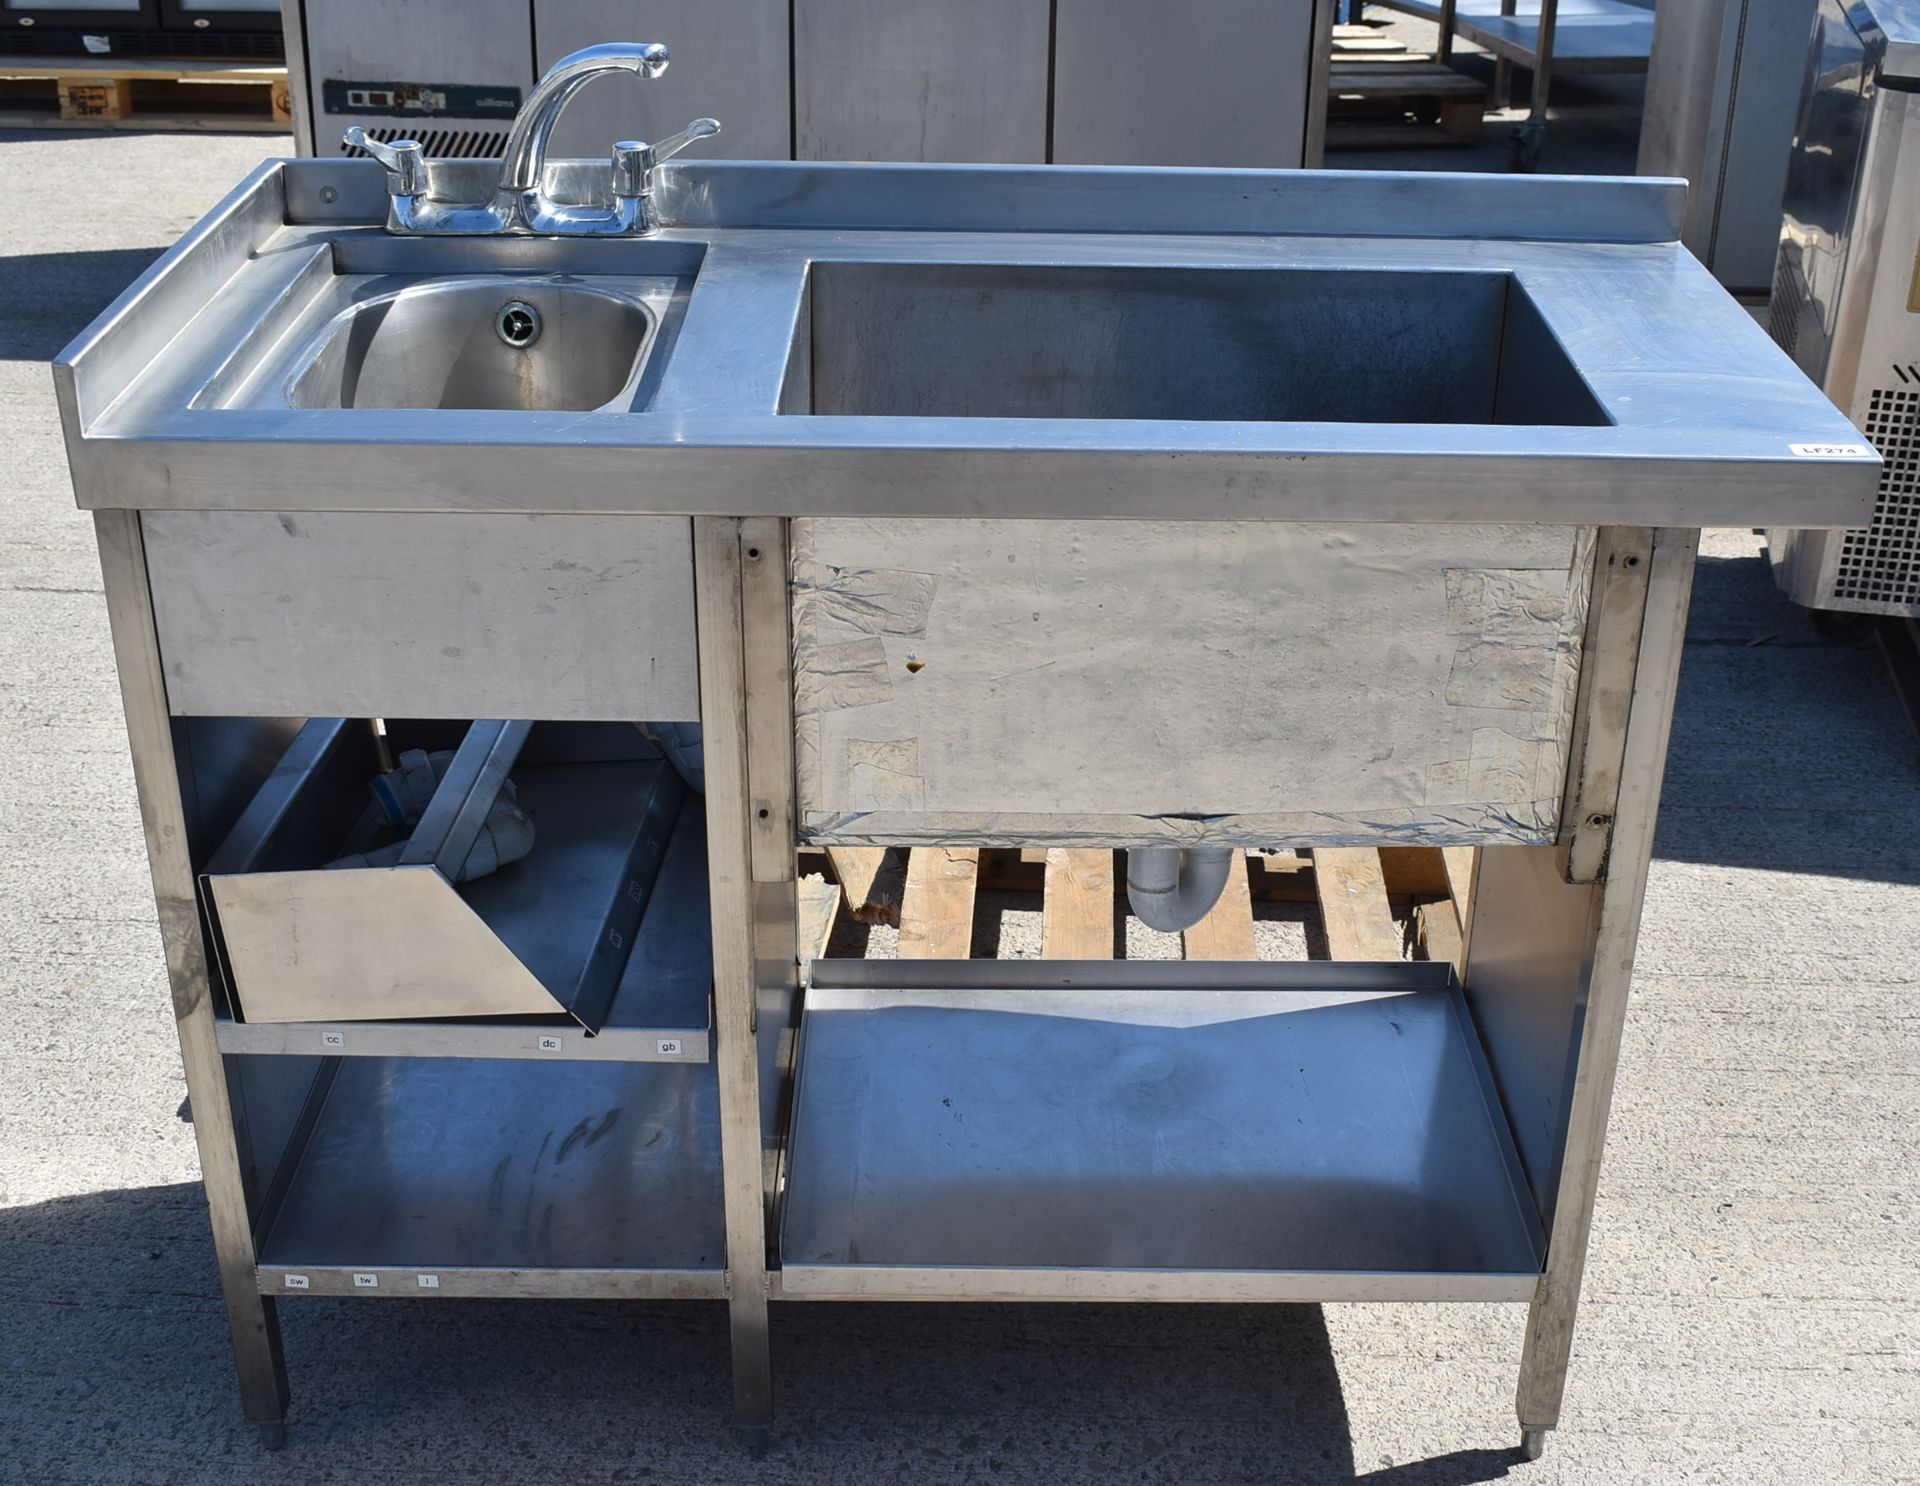 1 x Stainless Steel Wash Basin Unit For Commercial Kitchens - H87 x W117 x D53 cms - CL282 - Ref - Image 5 of 8